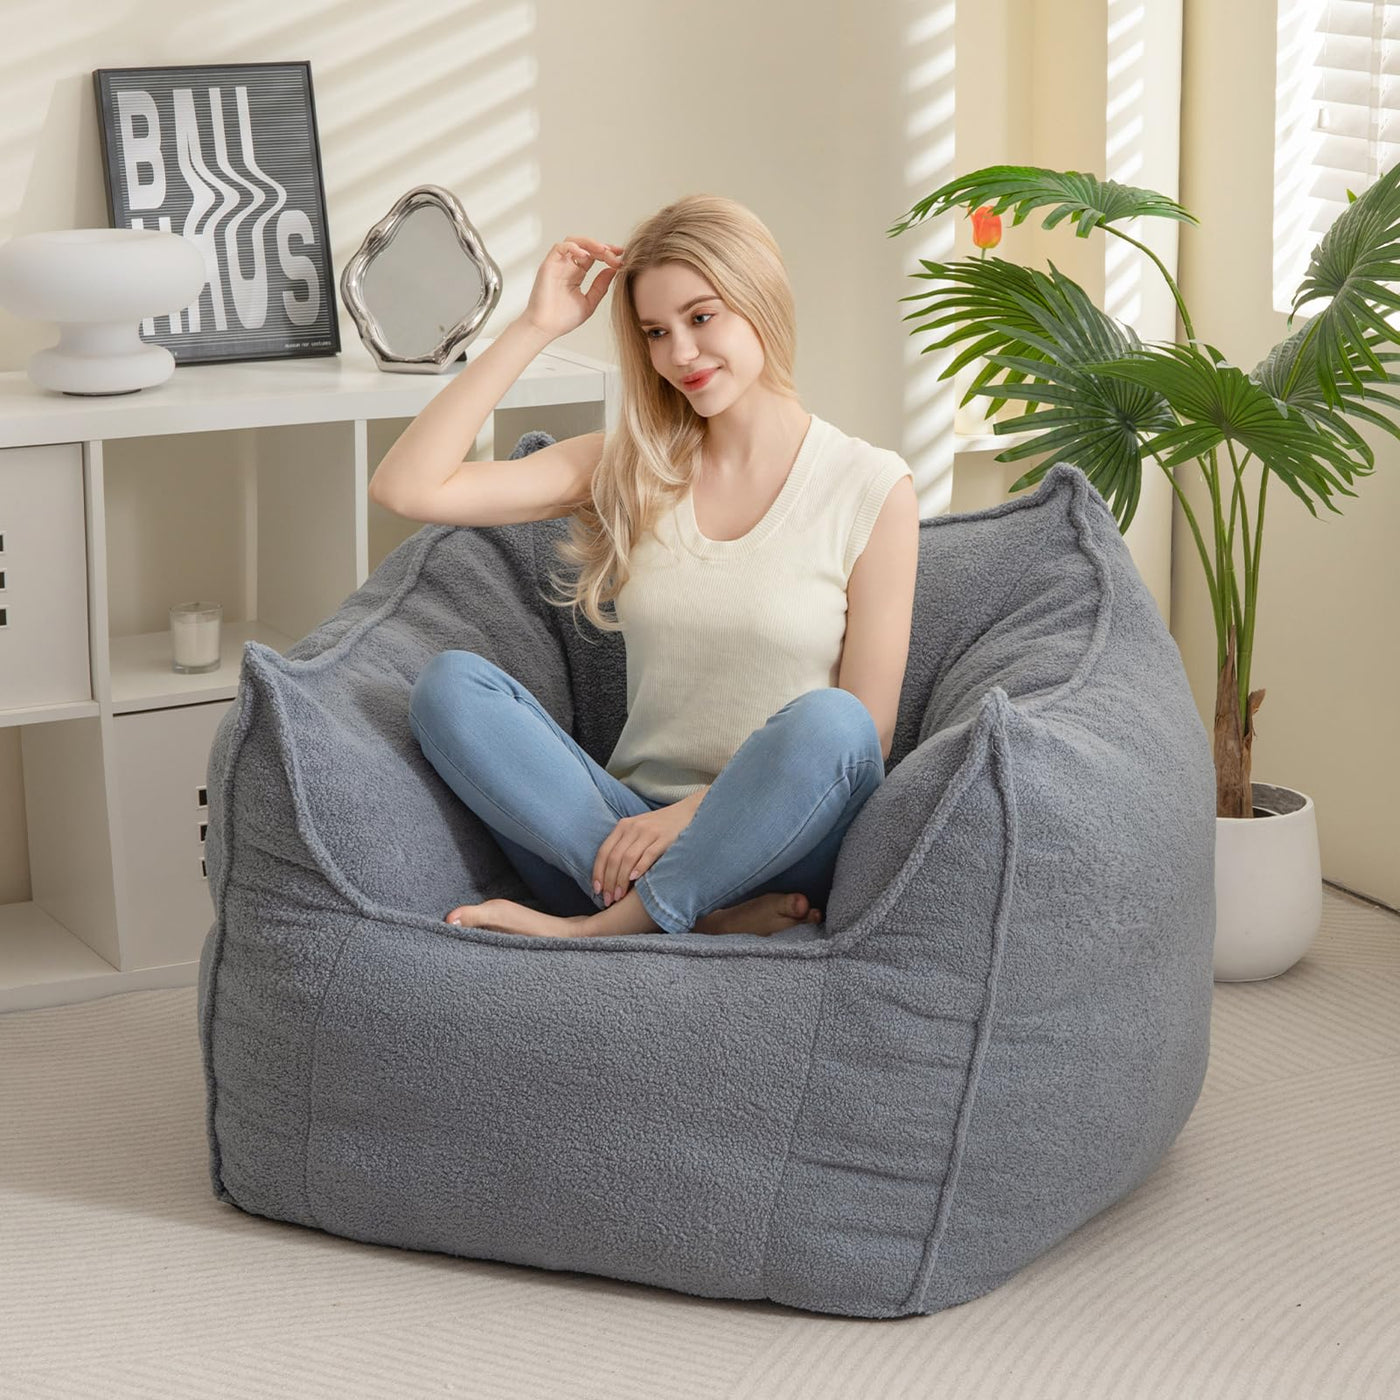 MAXYOYO Artistic Bean Bag Chair Sofa, Bean Bag Lazy Chair for Adults with Armrests for Gaming, Reading (Grey)